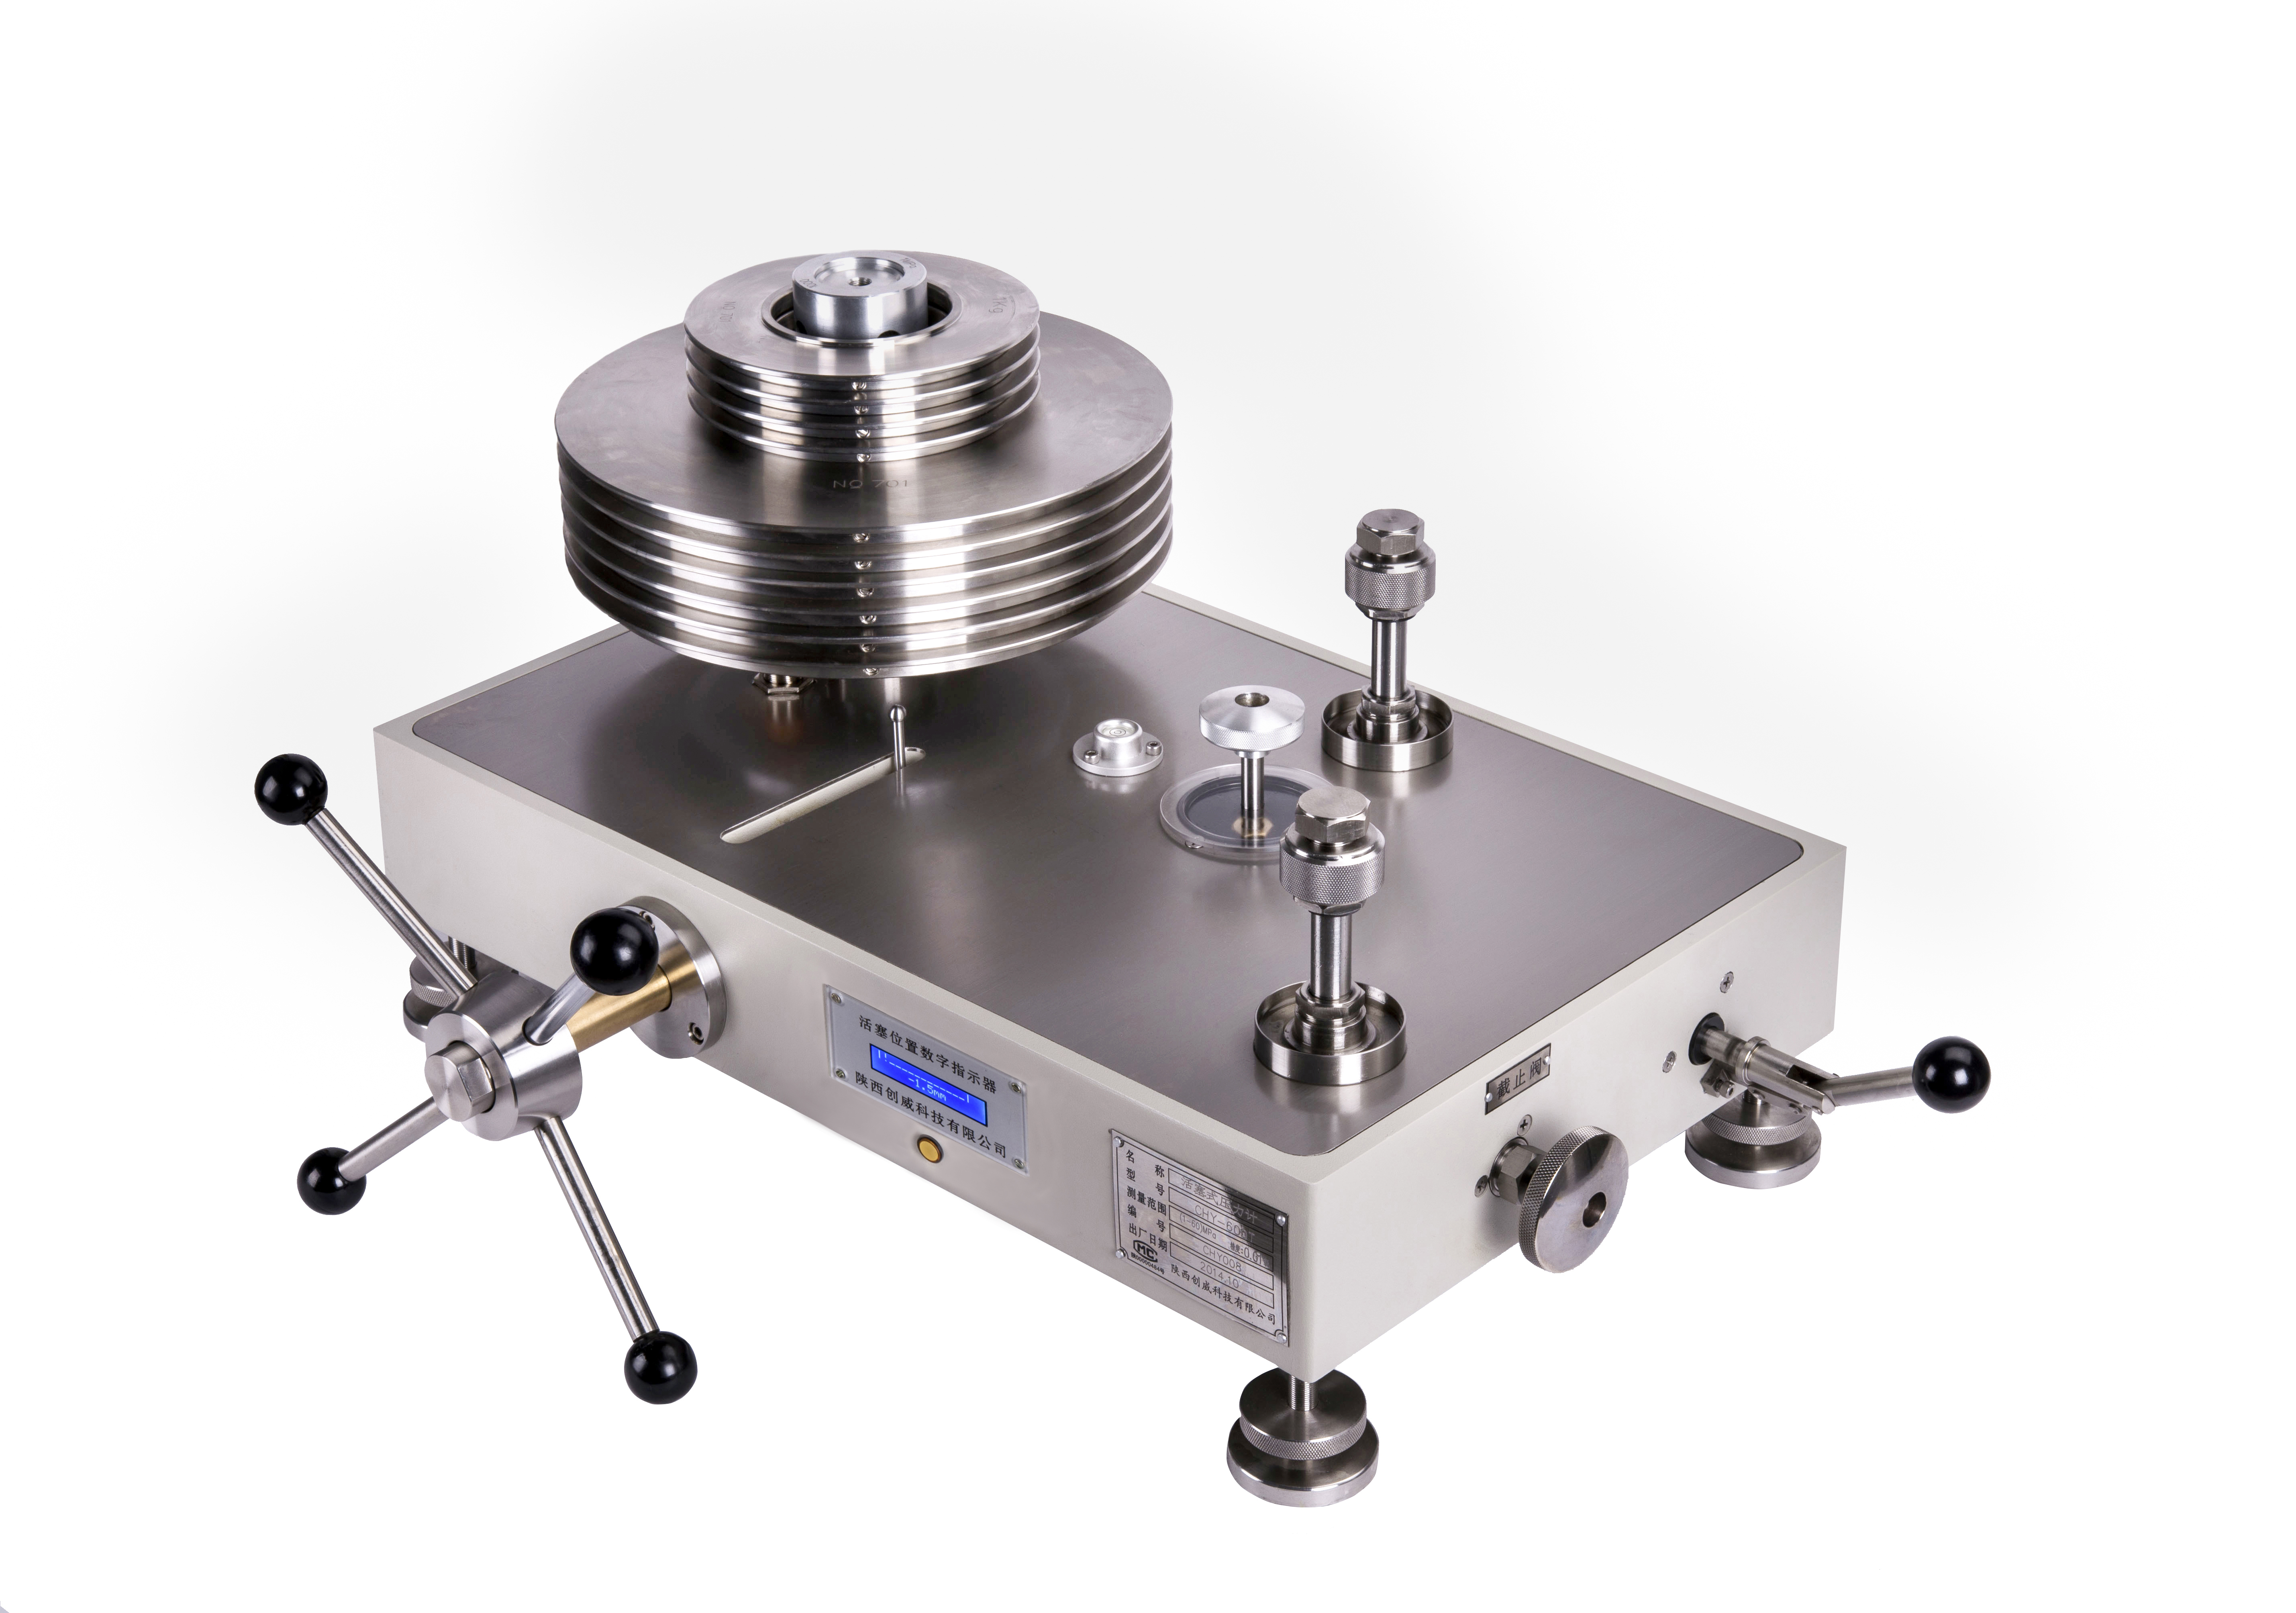 How to operate dead weight tester?